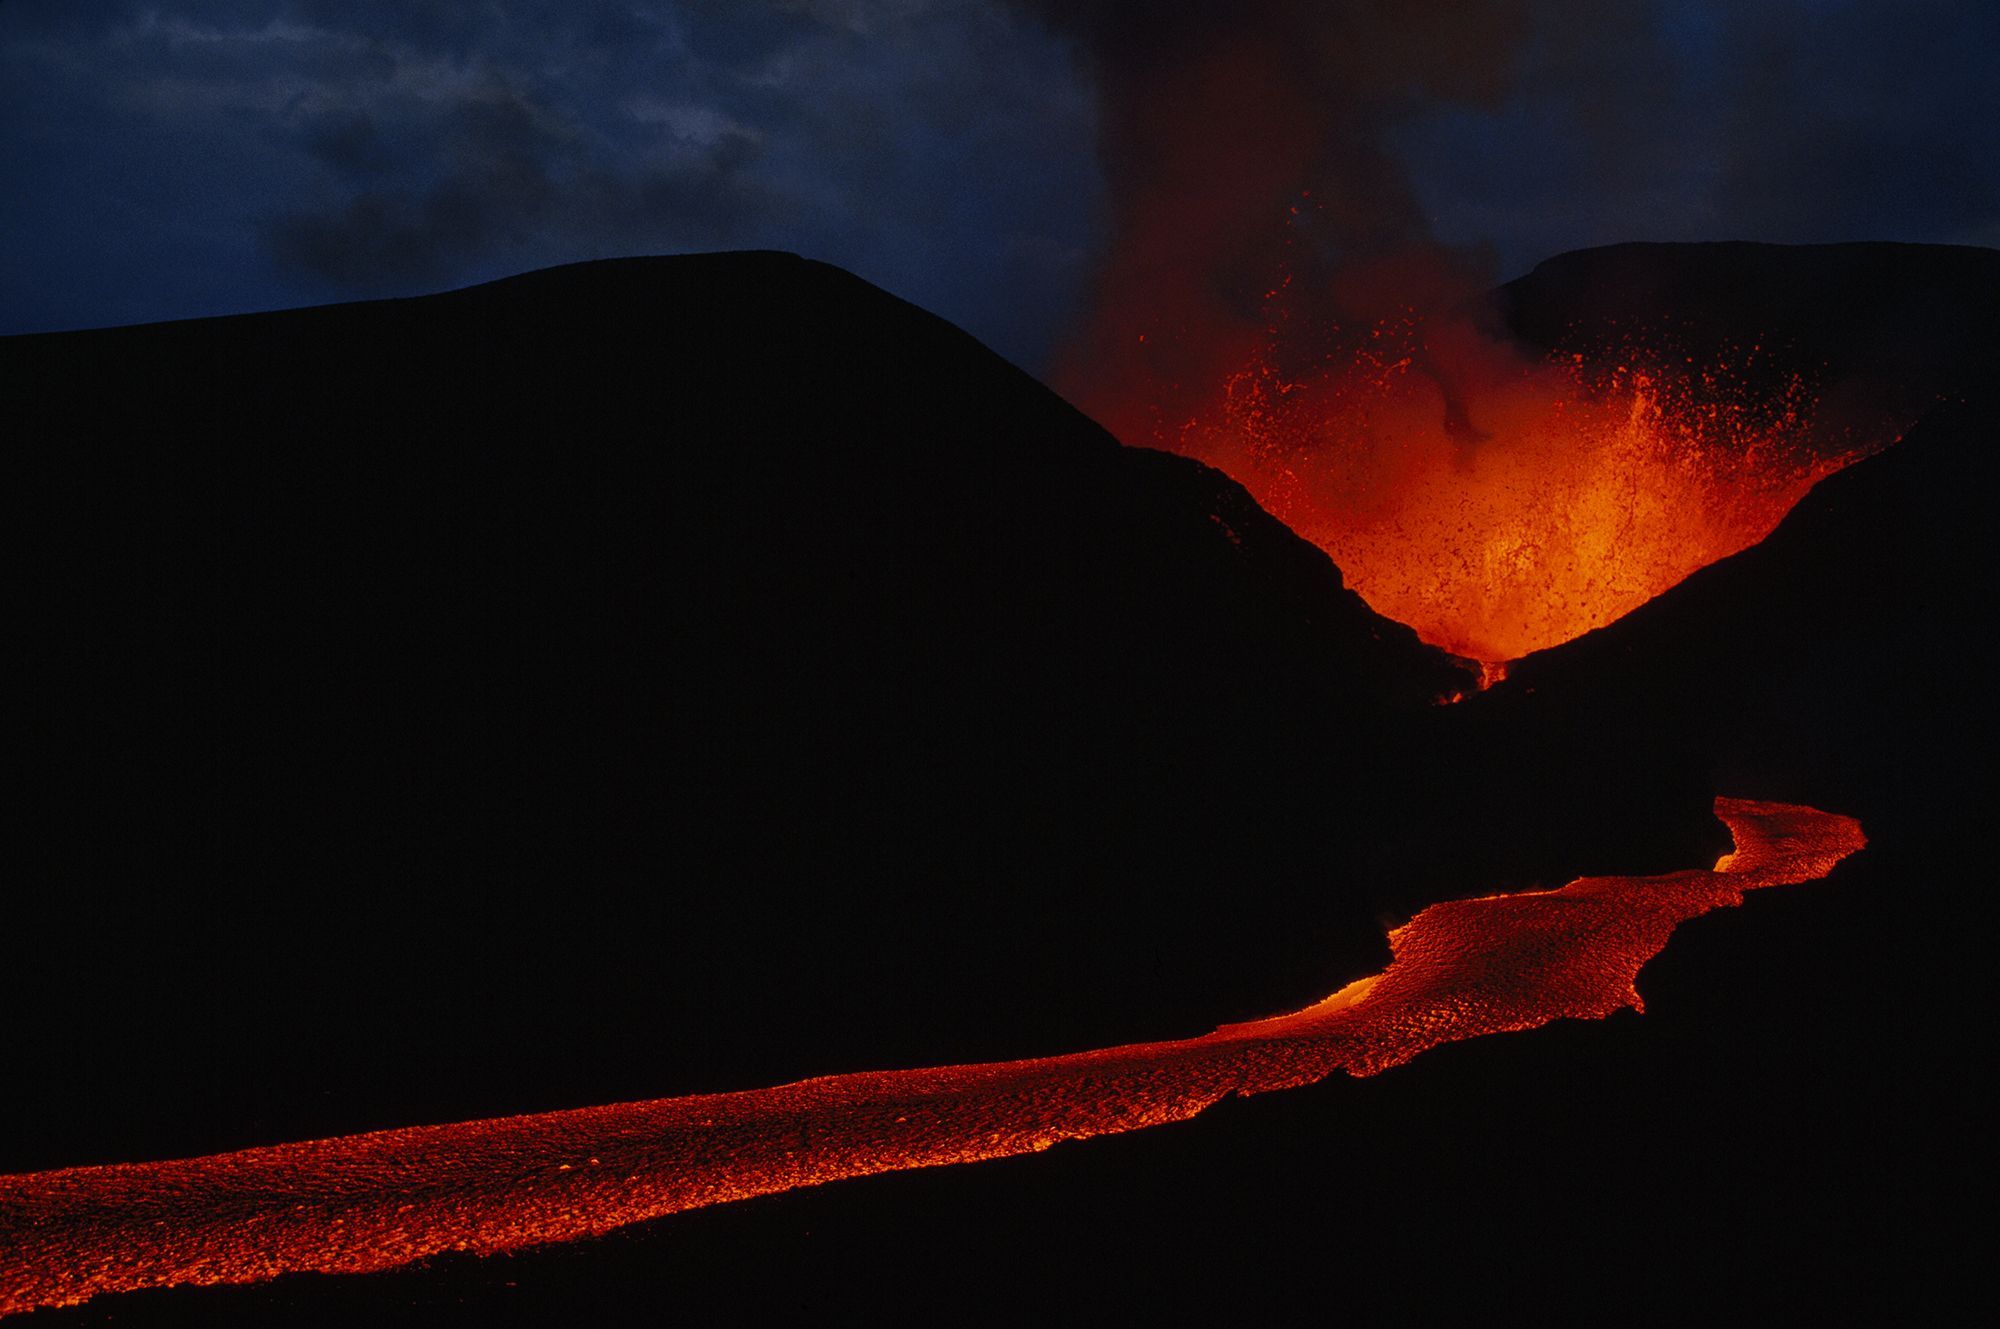 national geographic volcano case study